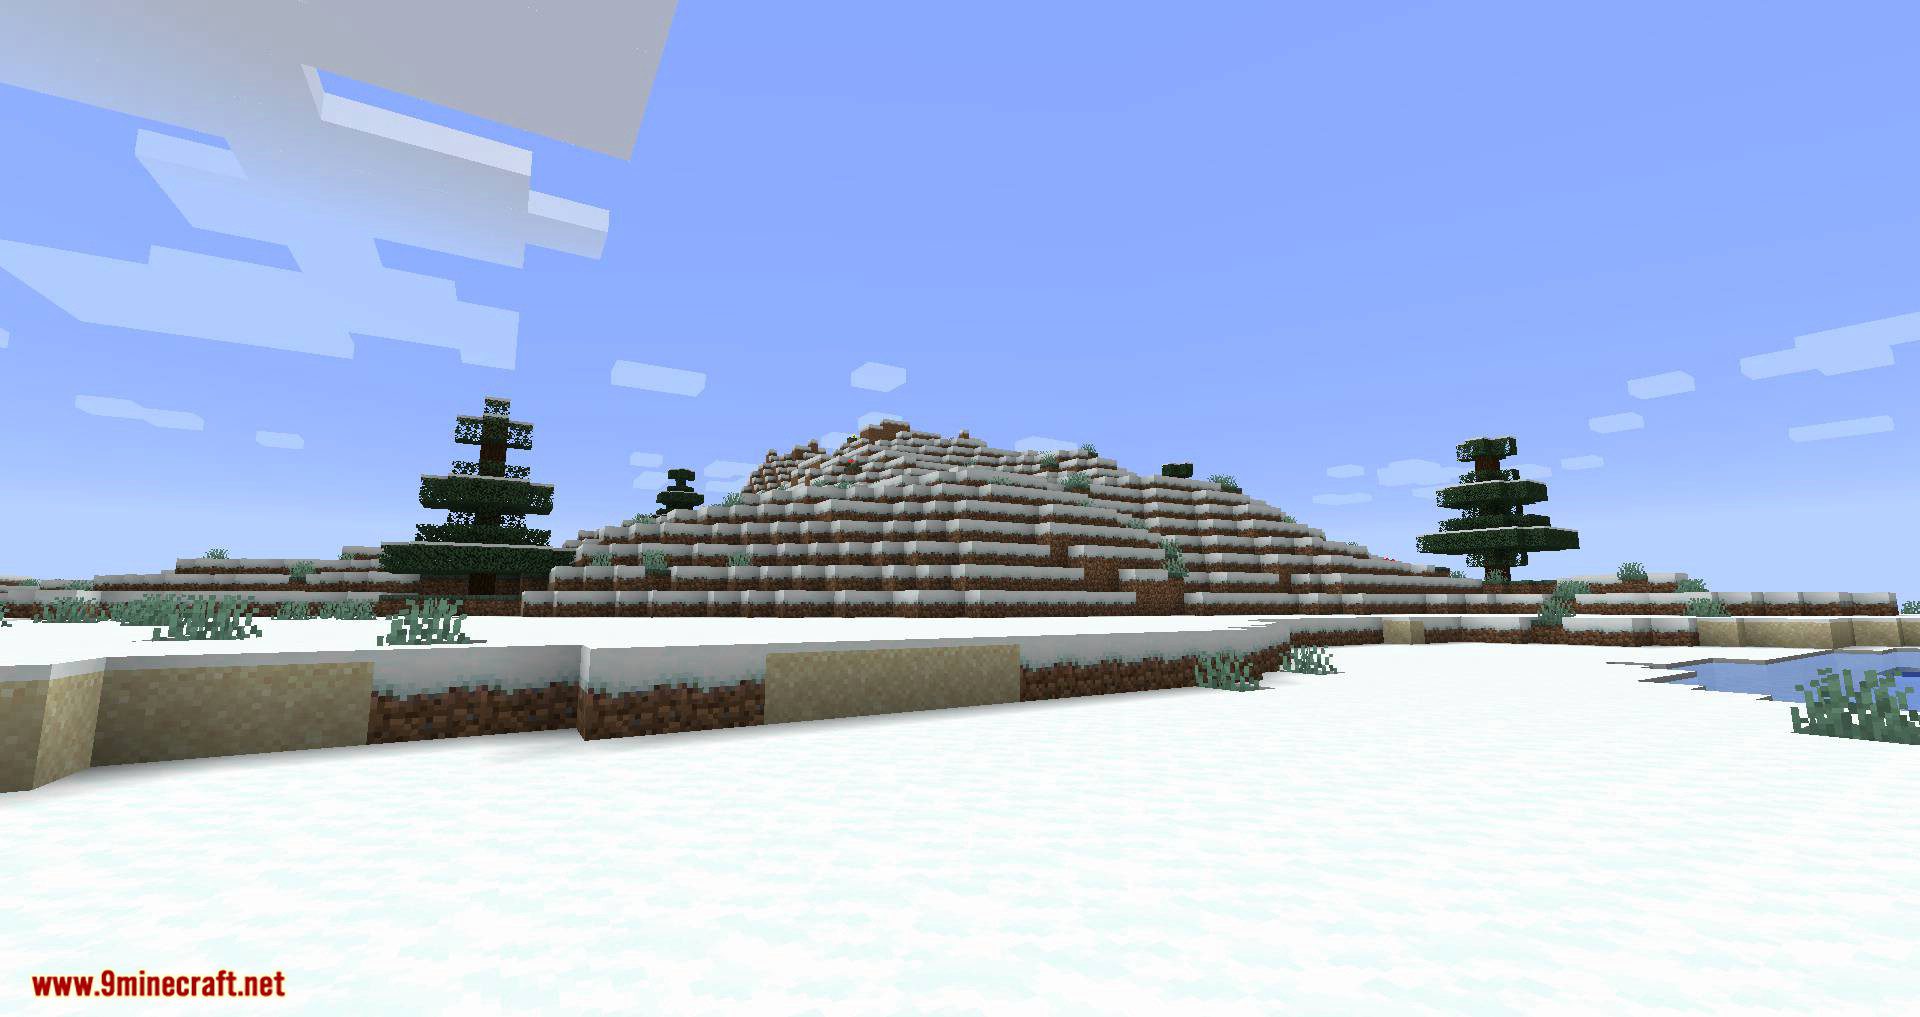 Snowballs Freeze Mobs Mod (1.20.4, 1.19.4) - Snowballs is More Powerful Now 3